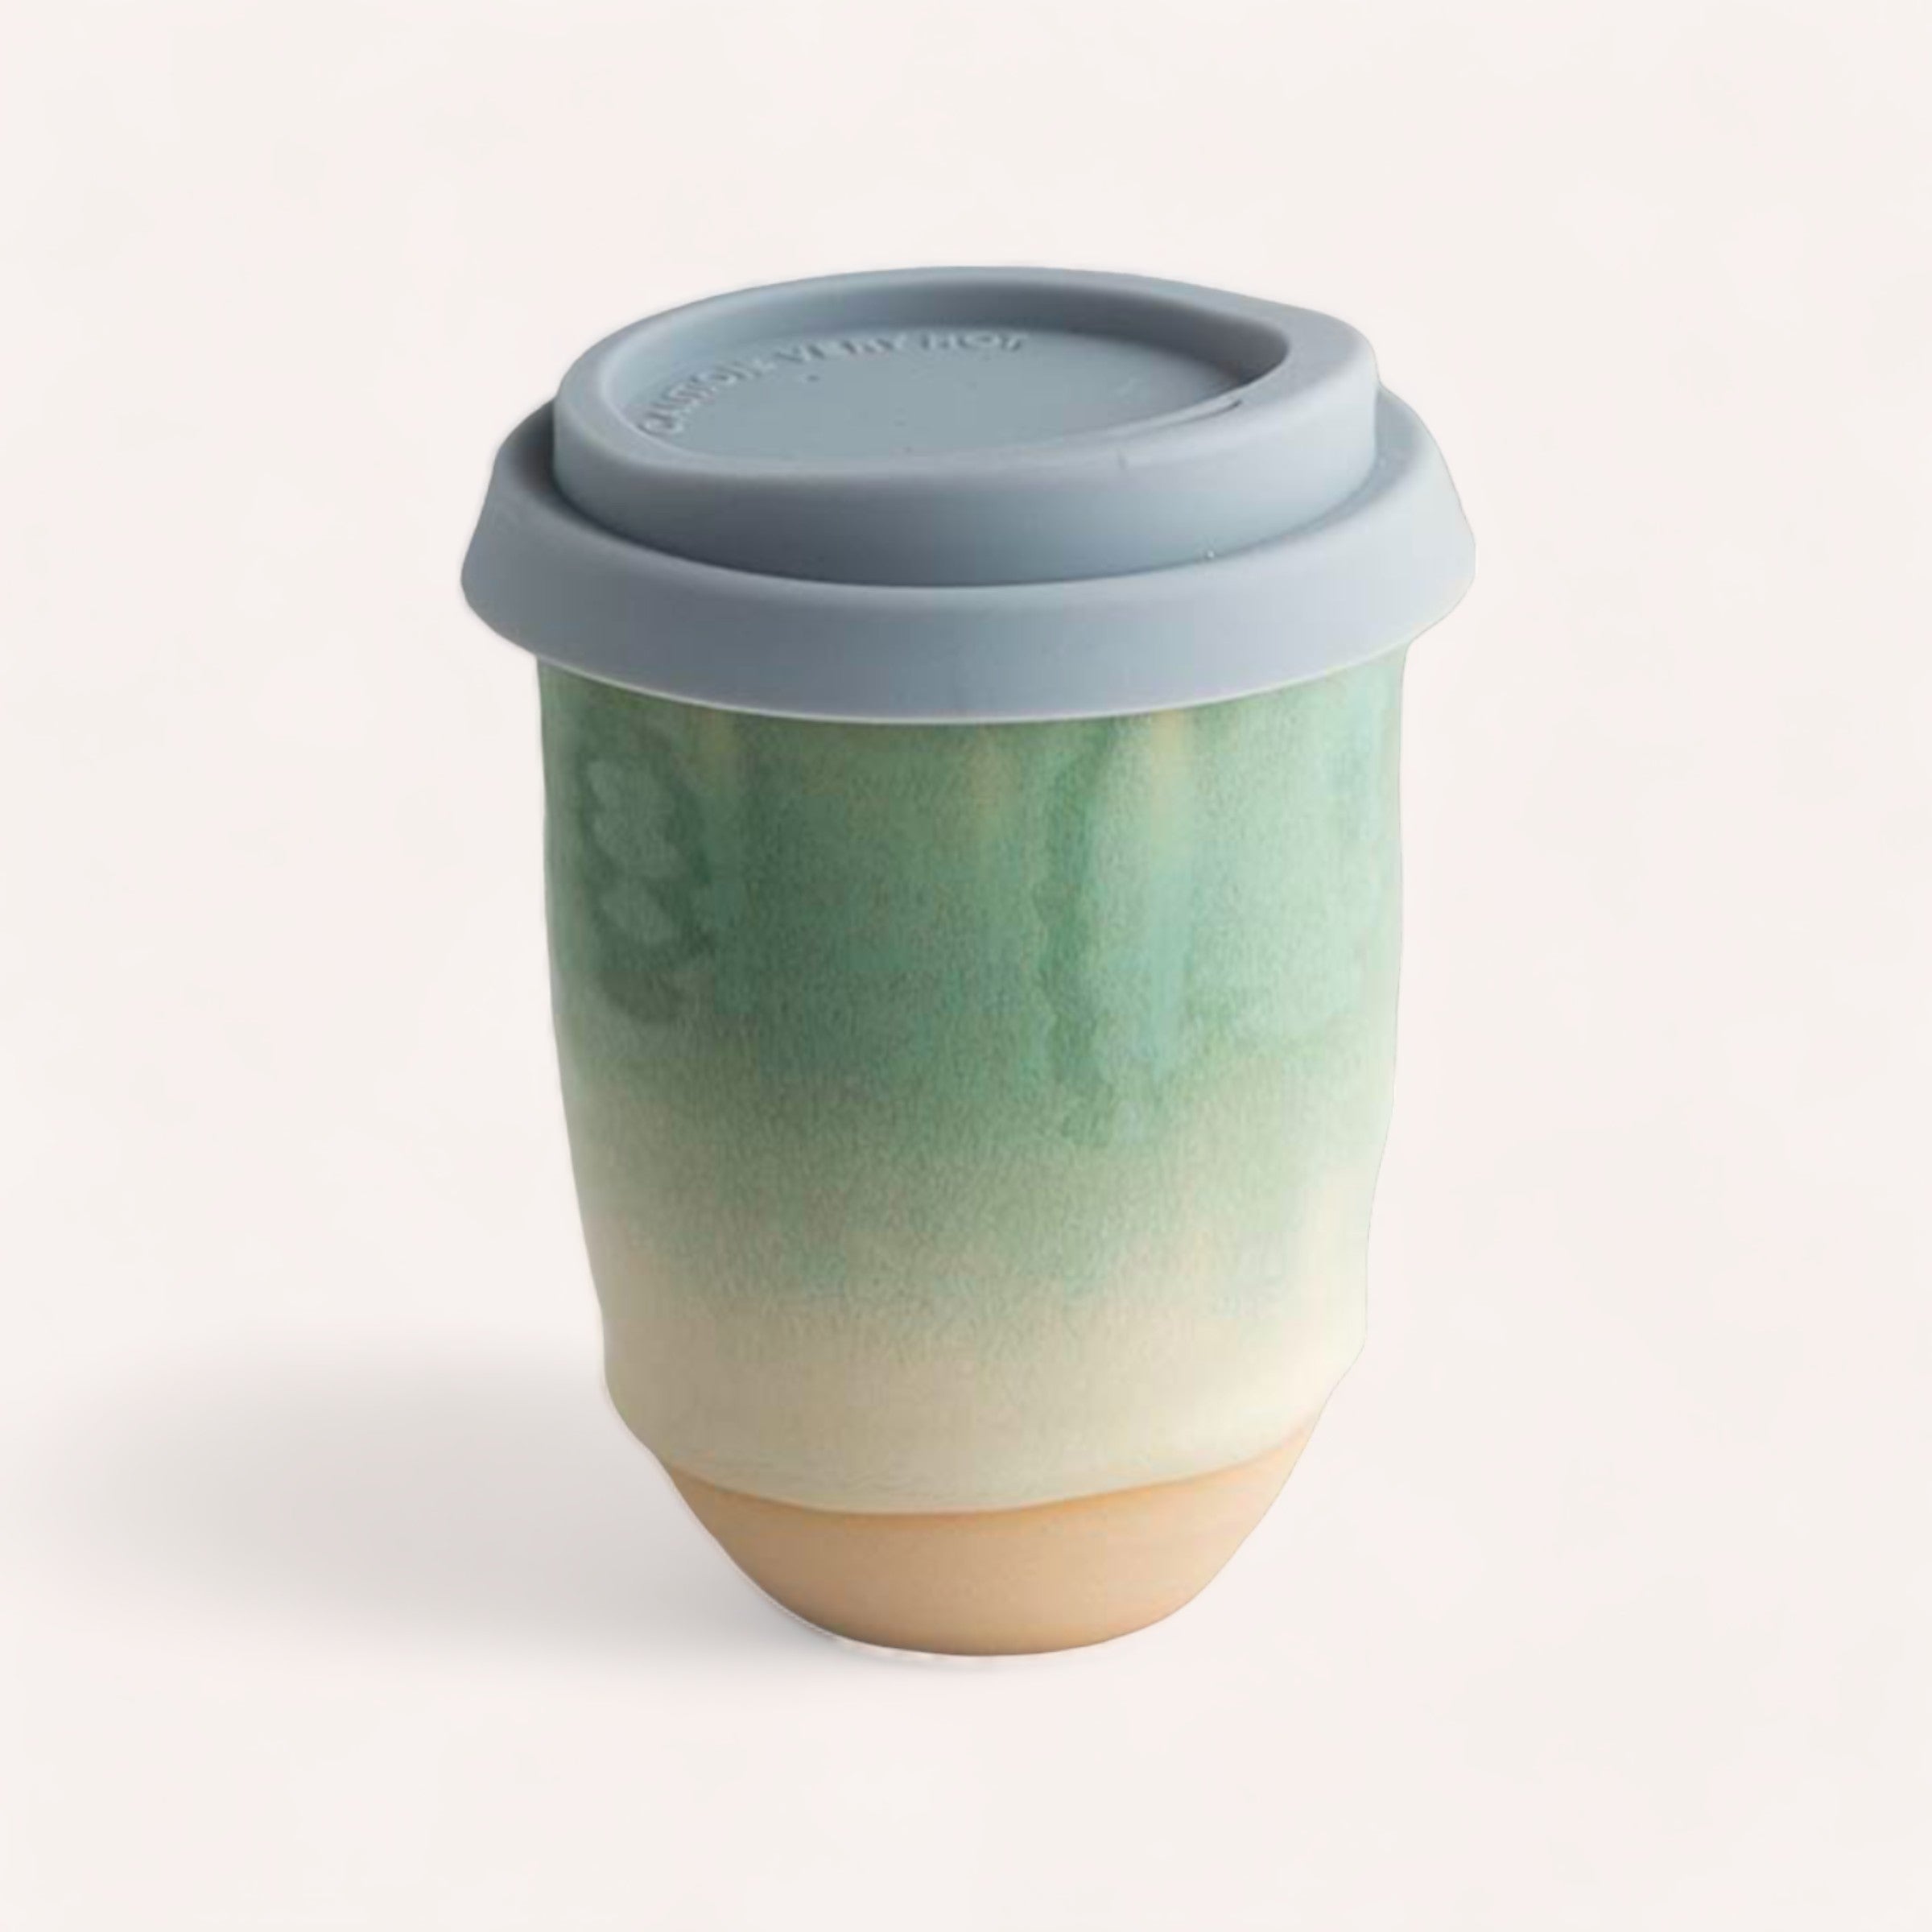 A handcrafted Ceramic Keep Cup by Sam Mayell with a watercolor design and a silicone lid.